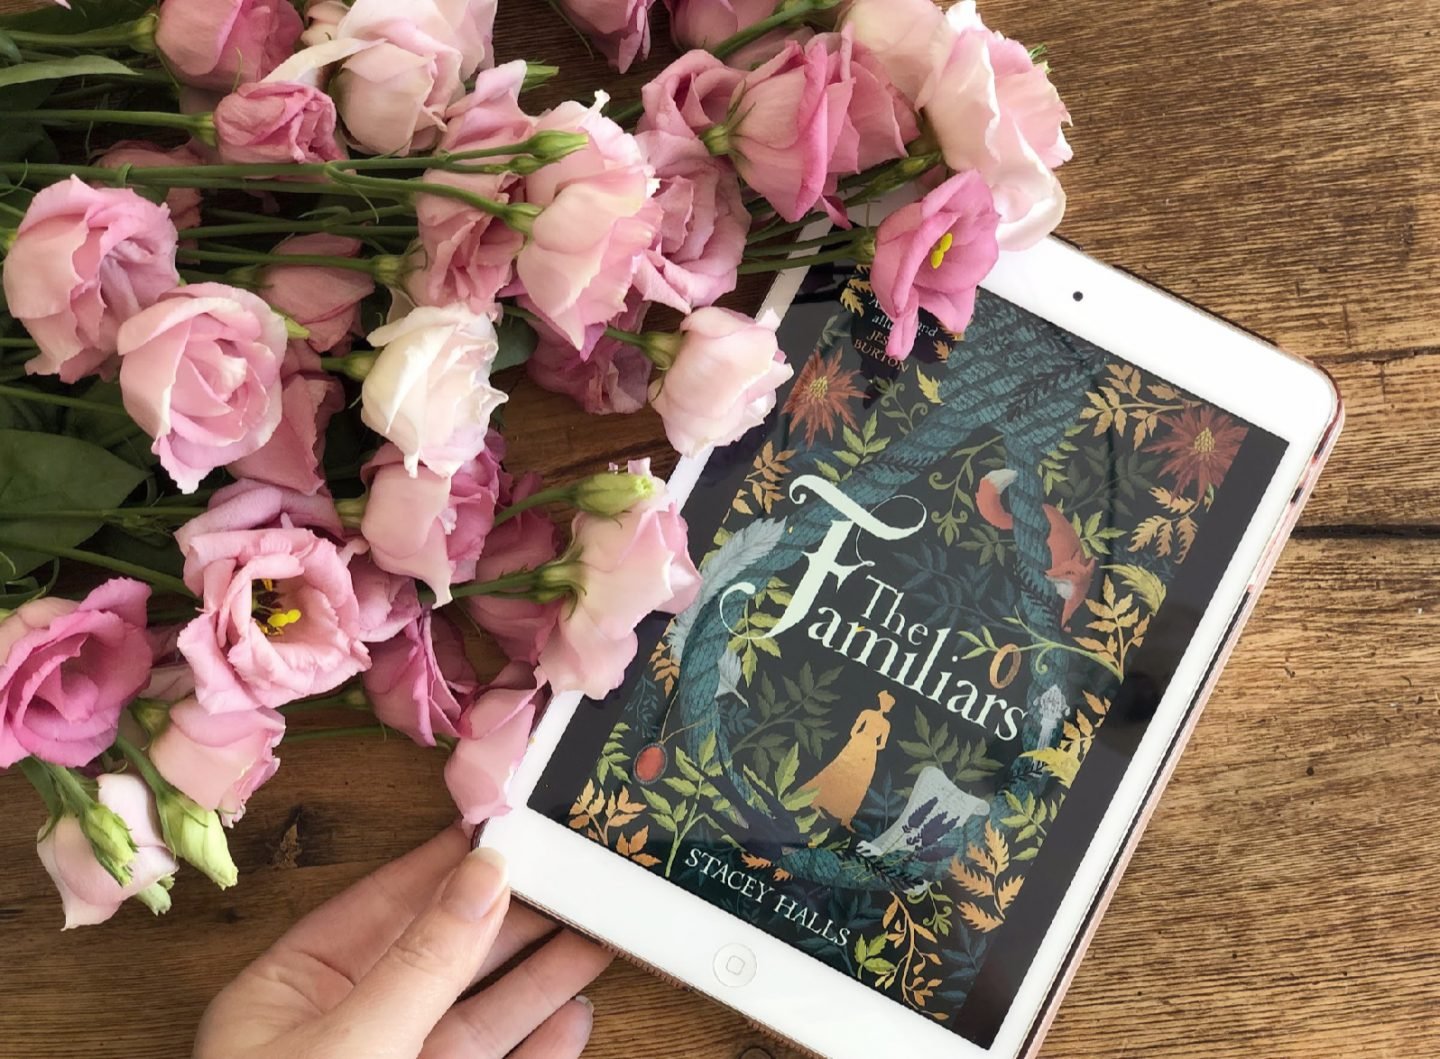 The Familiars By Stacey Halls